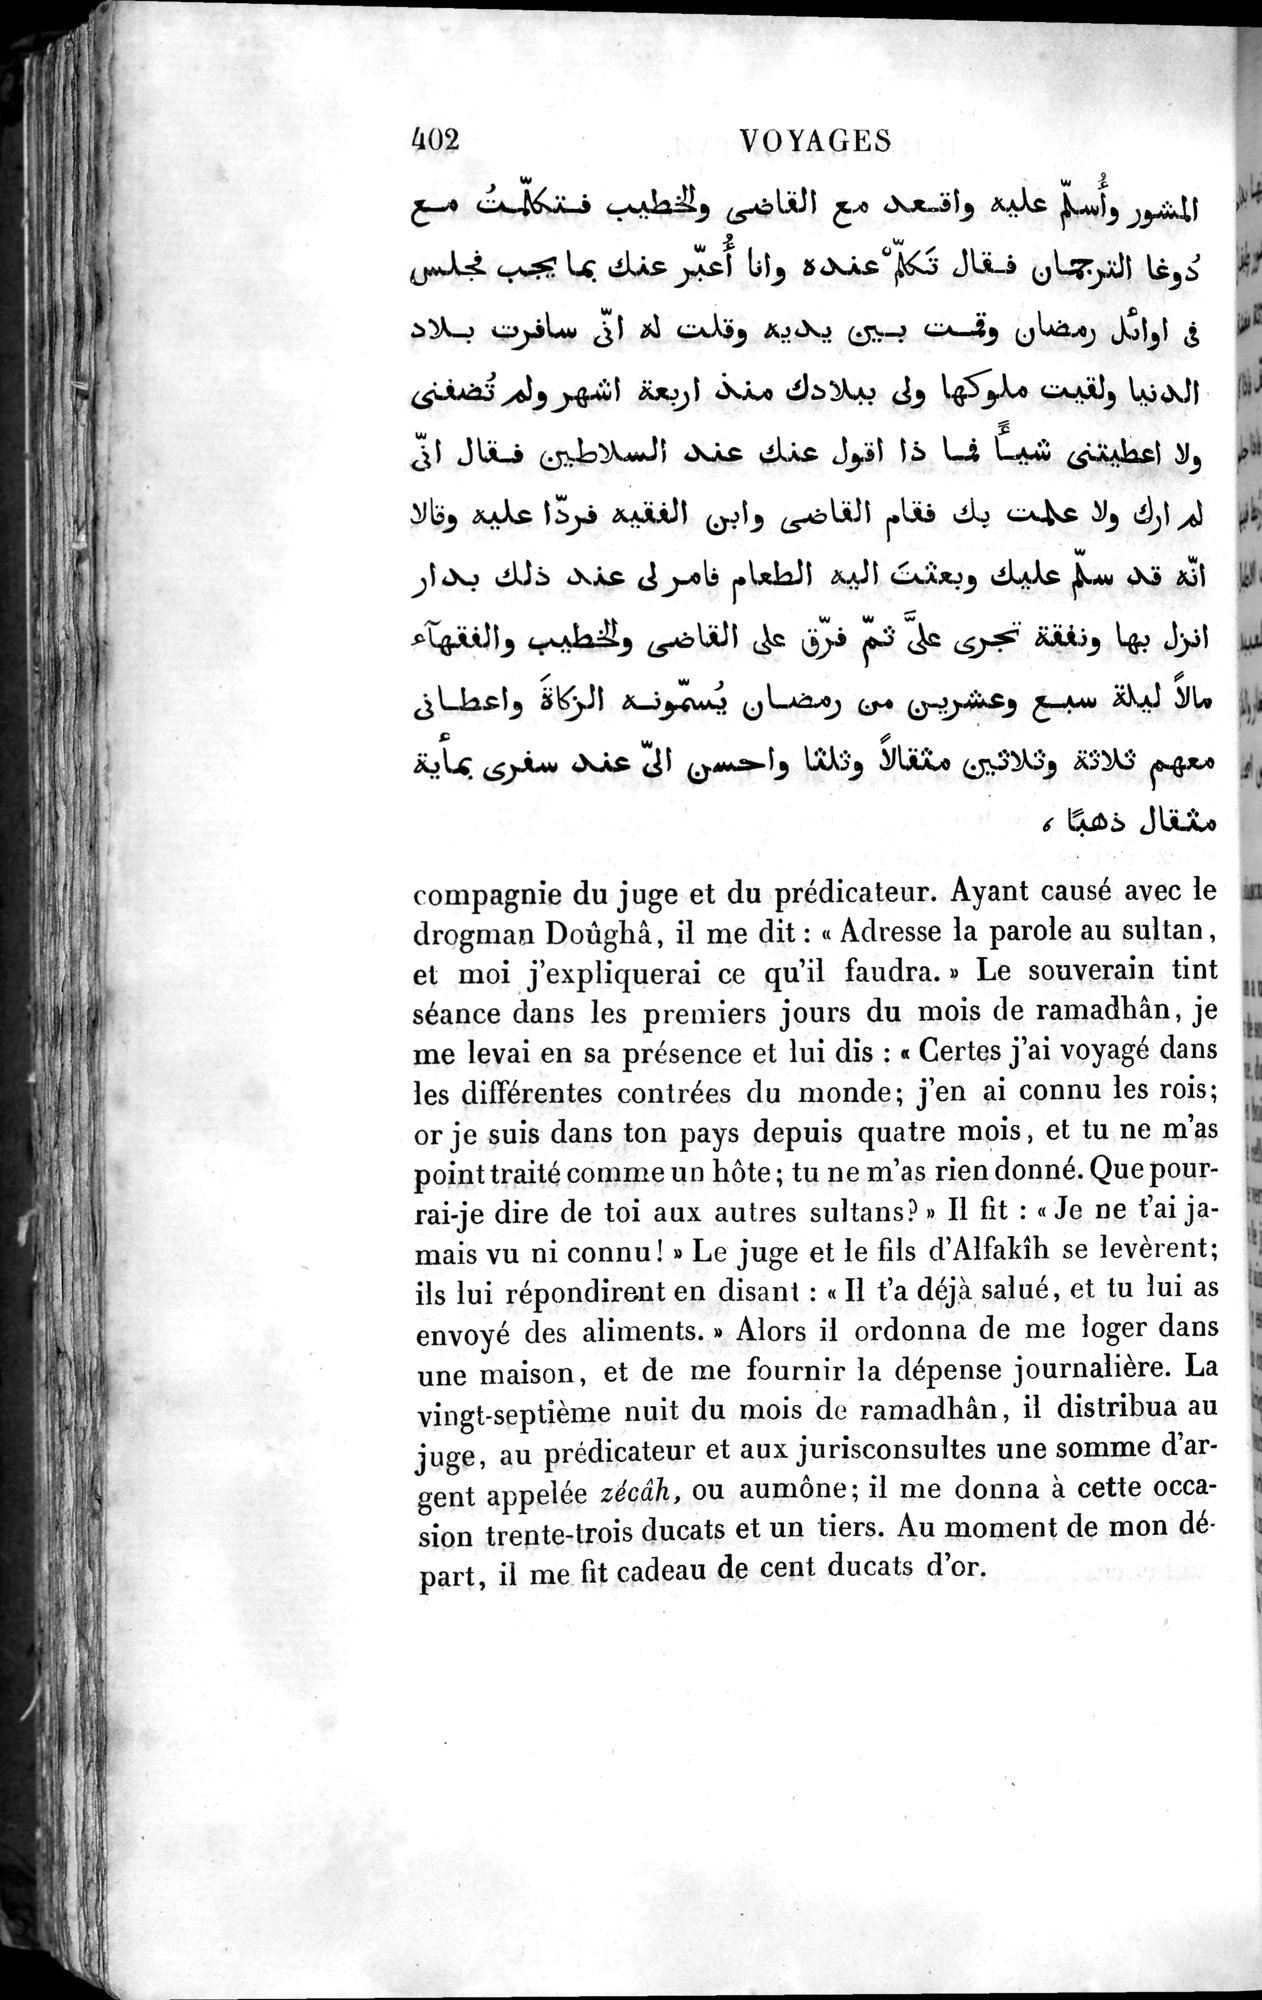 Voyages d'Ibn Batoutah : vol.4 / Page 414 (Grayscale High Resolution Image)